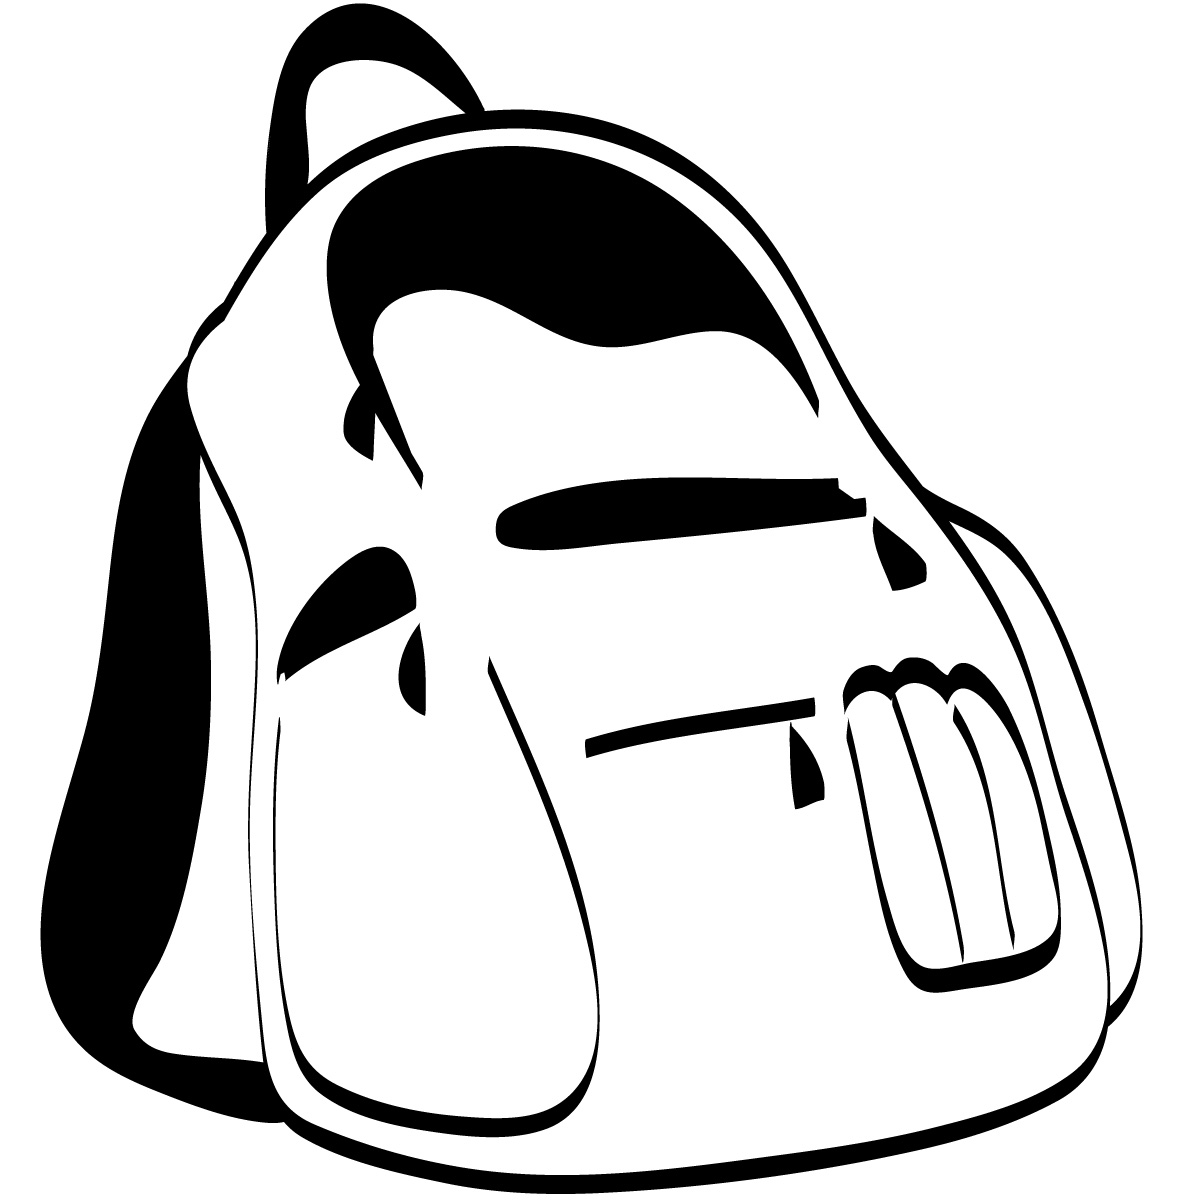 Images For > Shopping Bag Clip Art Black And White